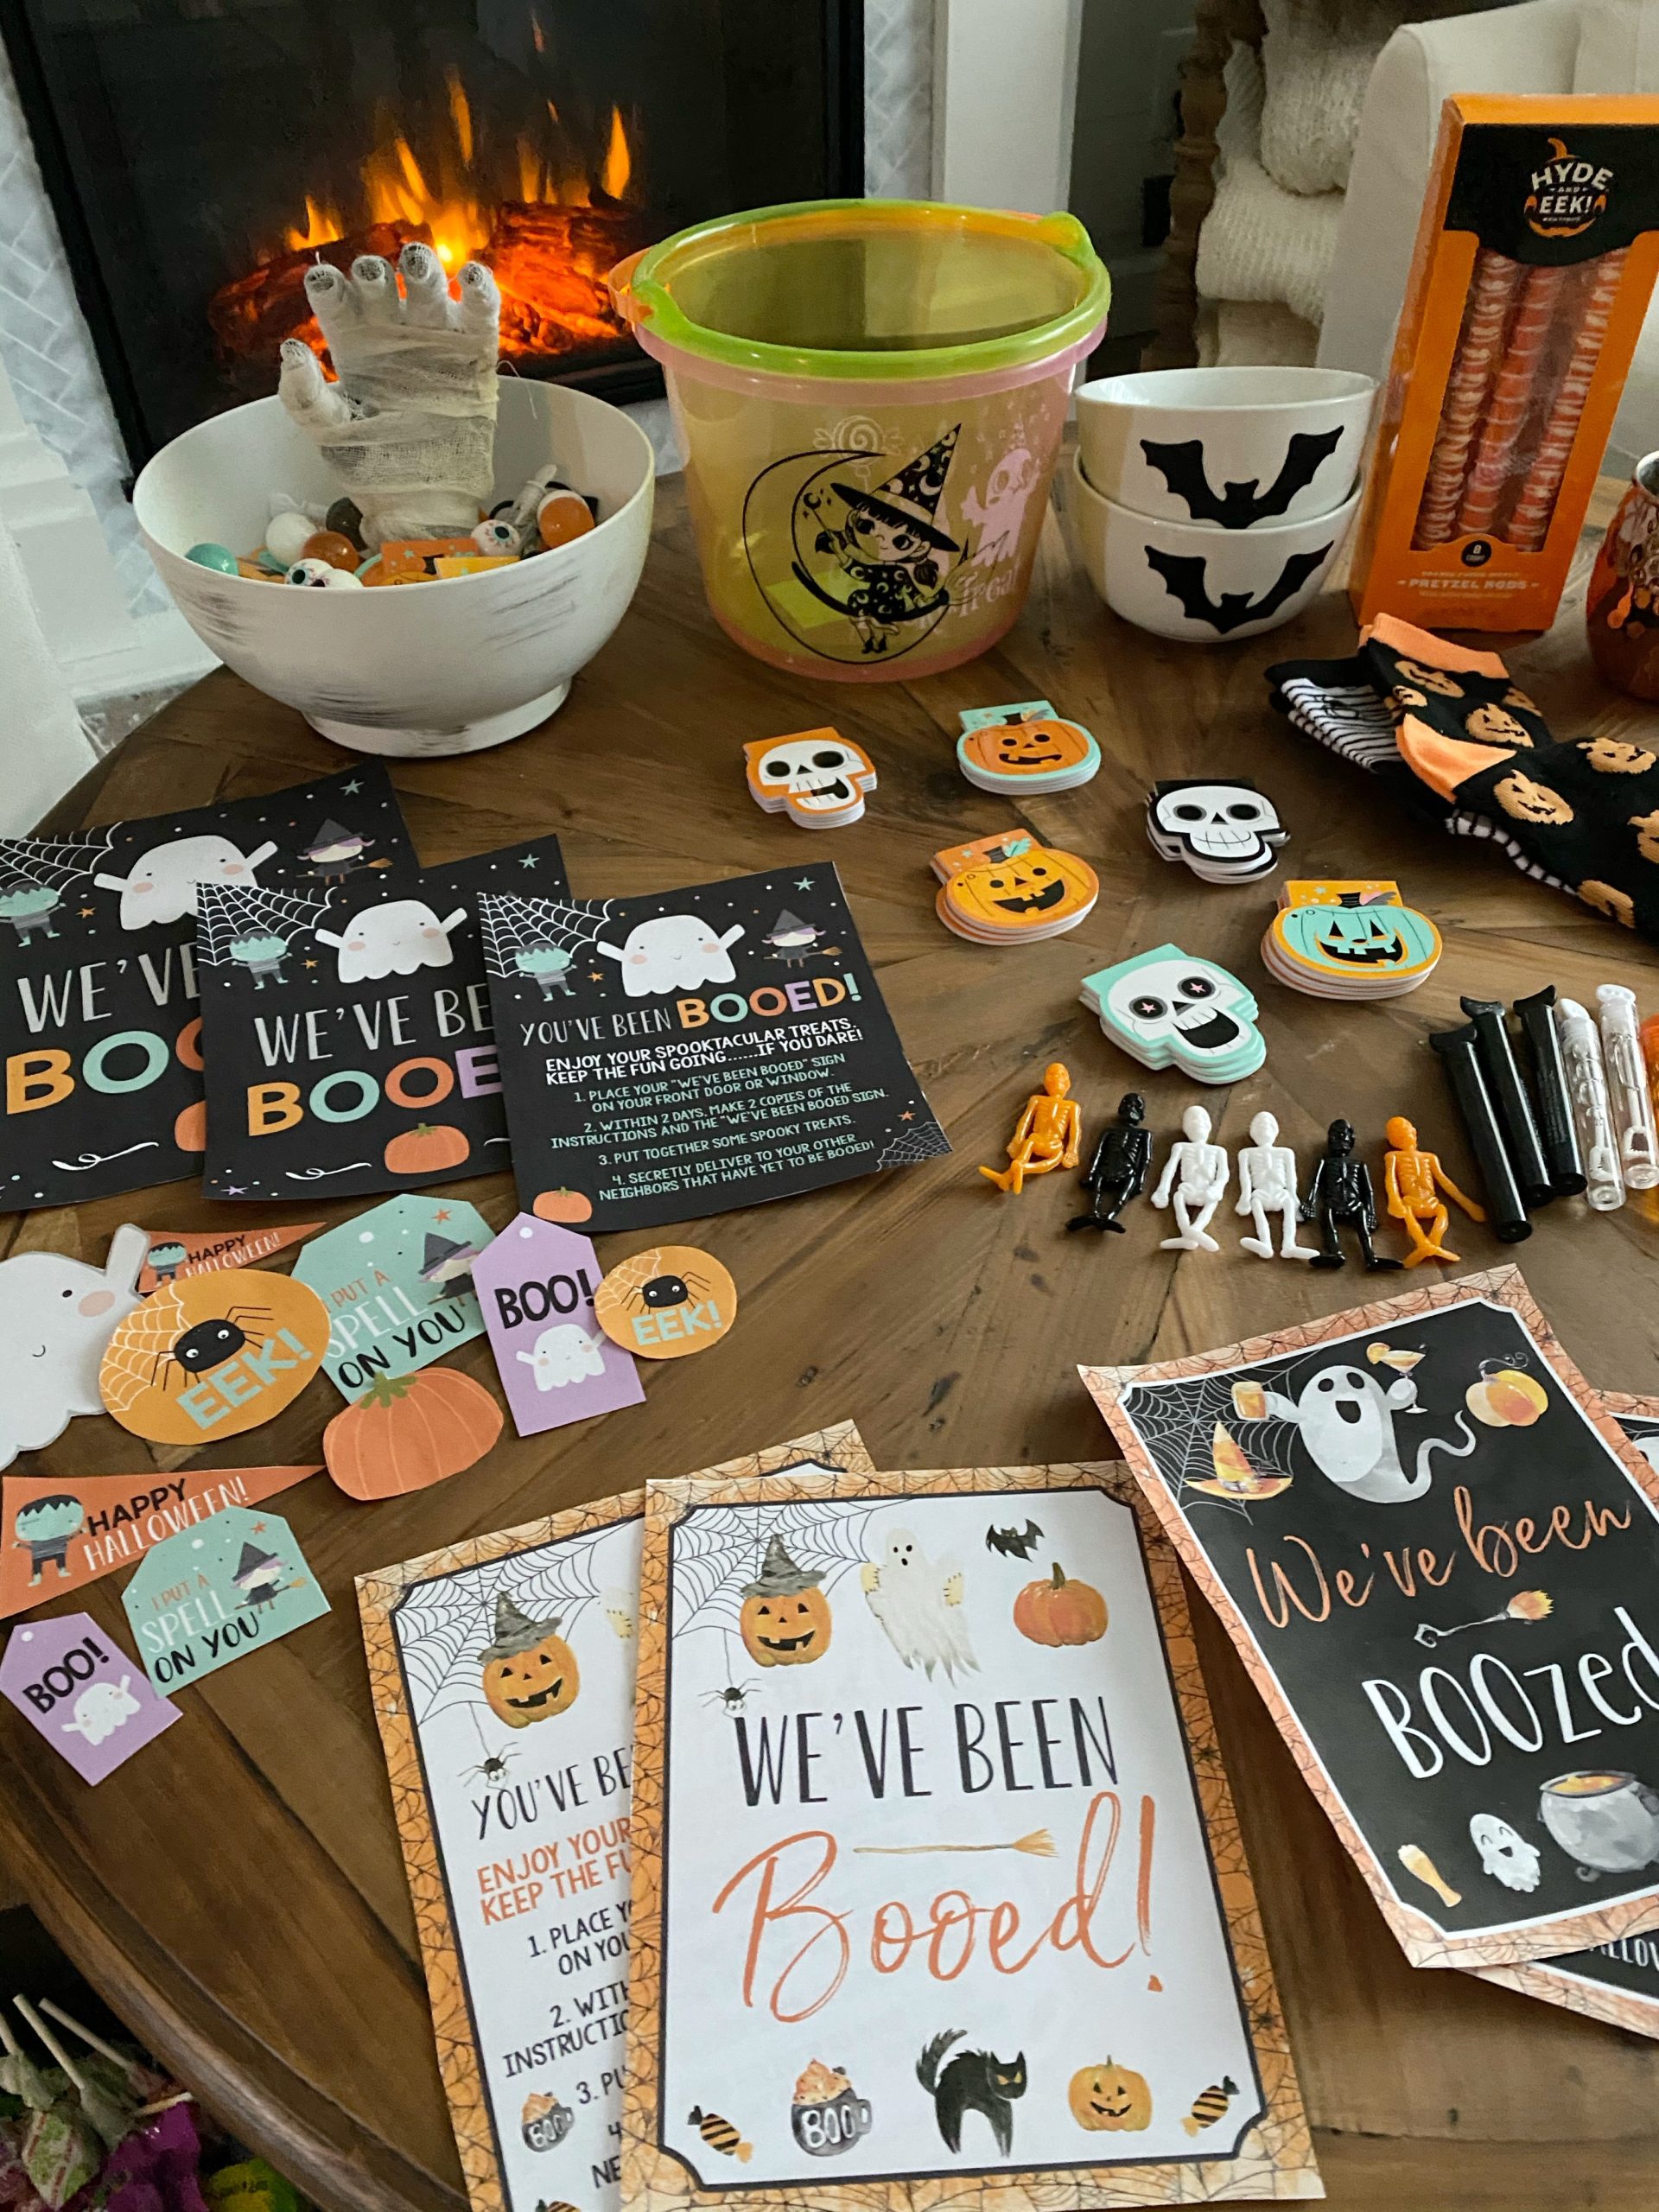 BOO Bag Ideas – You’ve been Booed